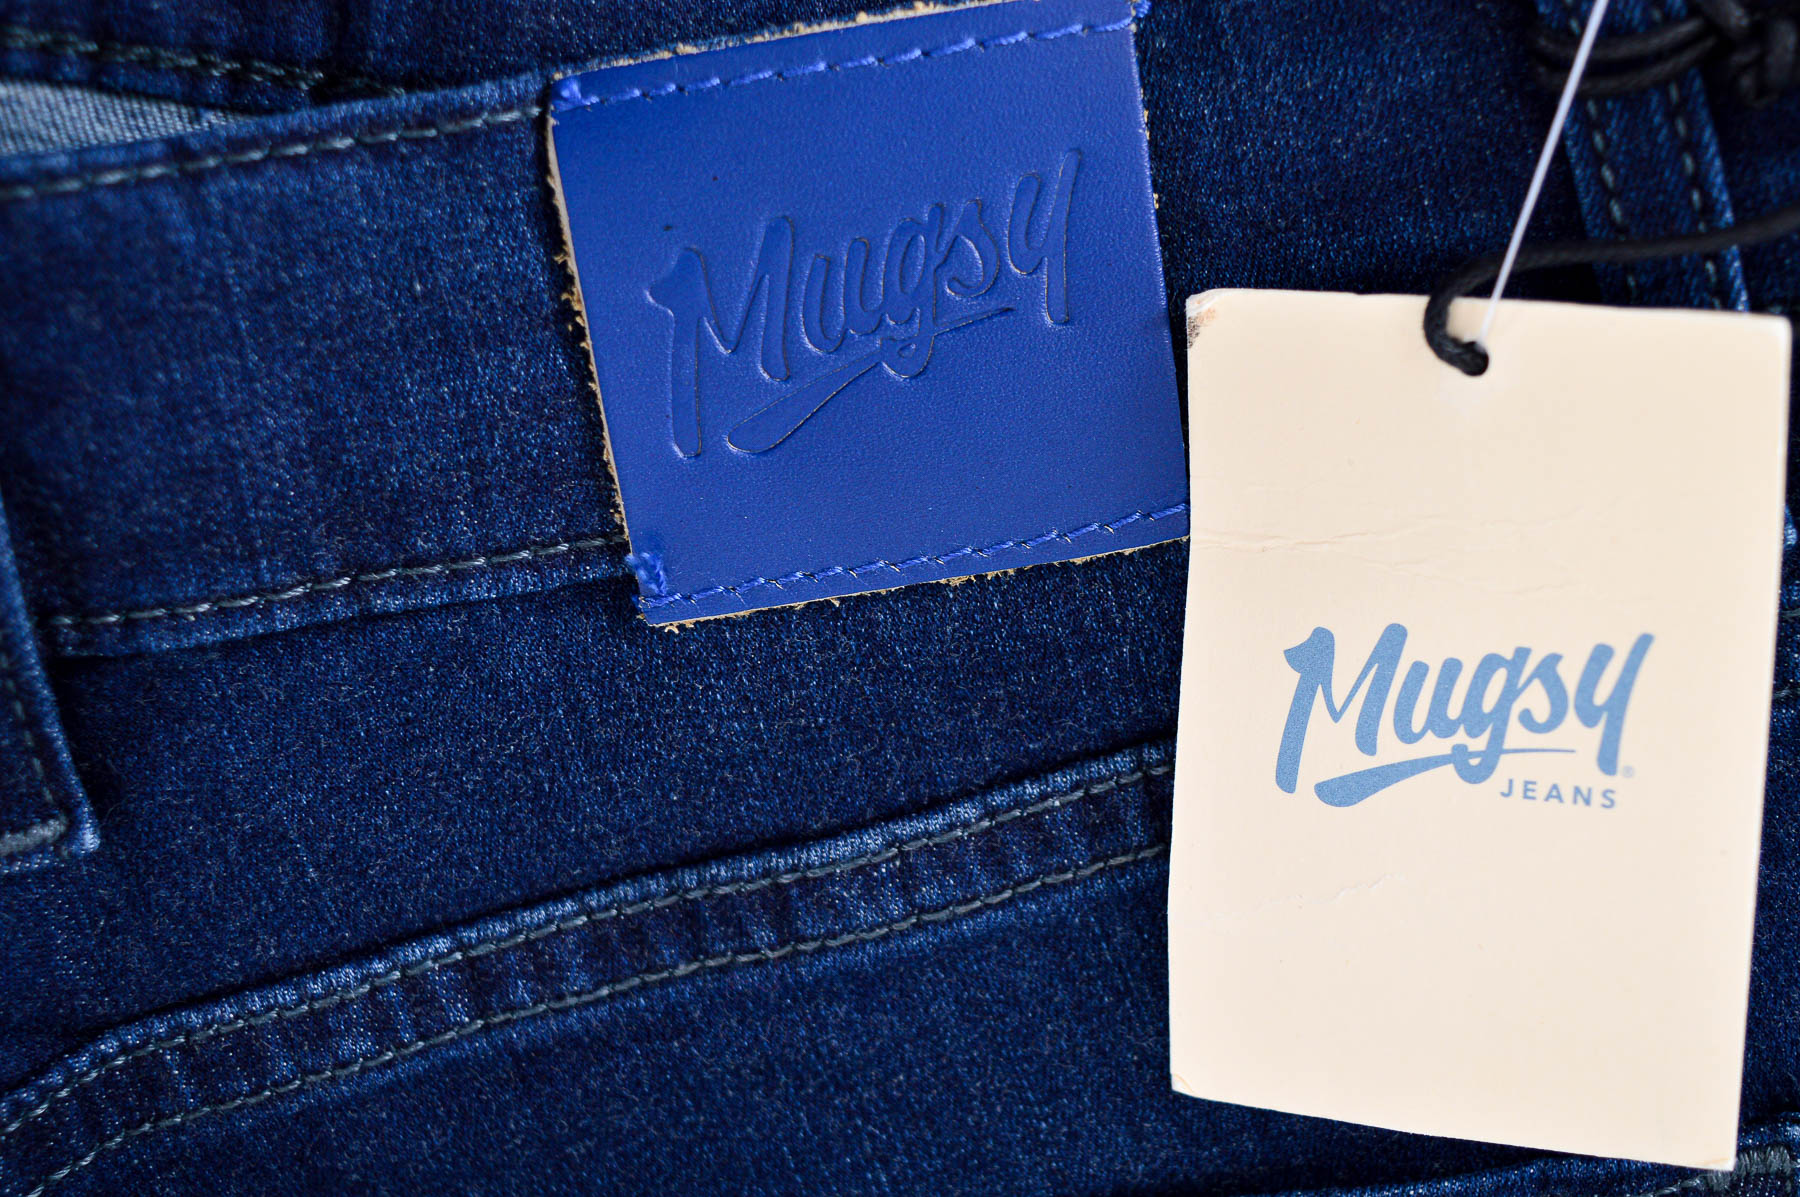 Men's jeans - Mugsy Jeans - 2